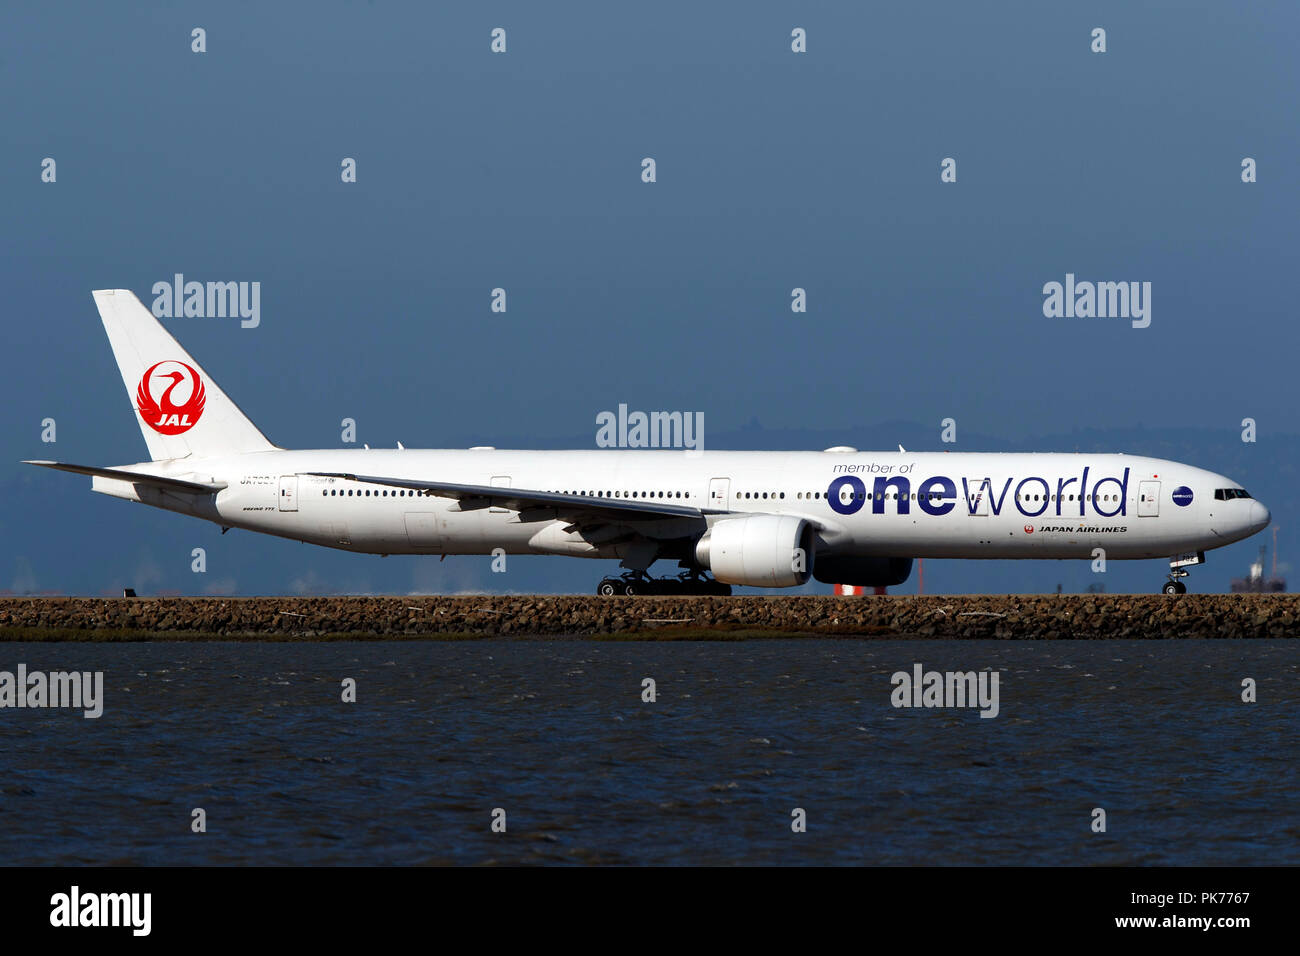 Boeing 777-346(ER) (JA732J) operated by Japan Airlines with the Oneworld livery taxiing at San Francisco International Airport (KSFO), San Francisco, California, United States of America Stock Photo